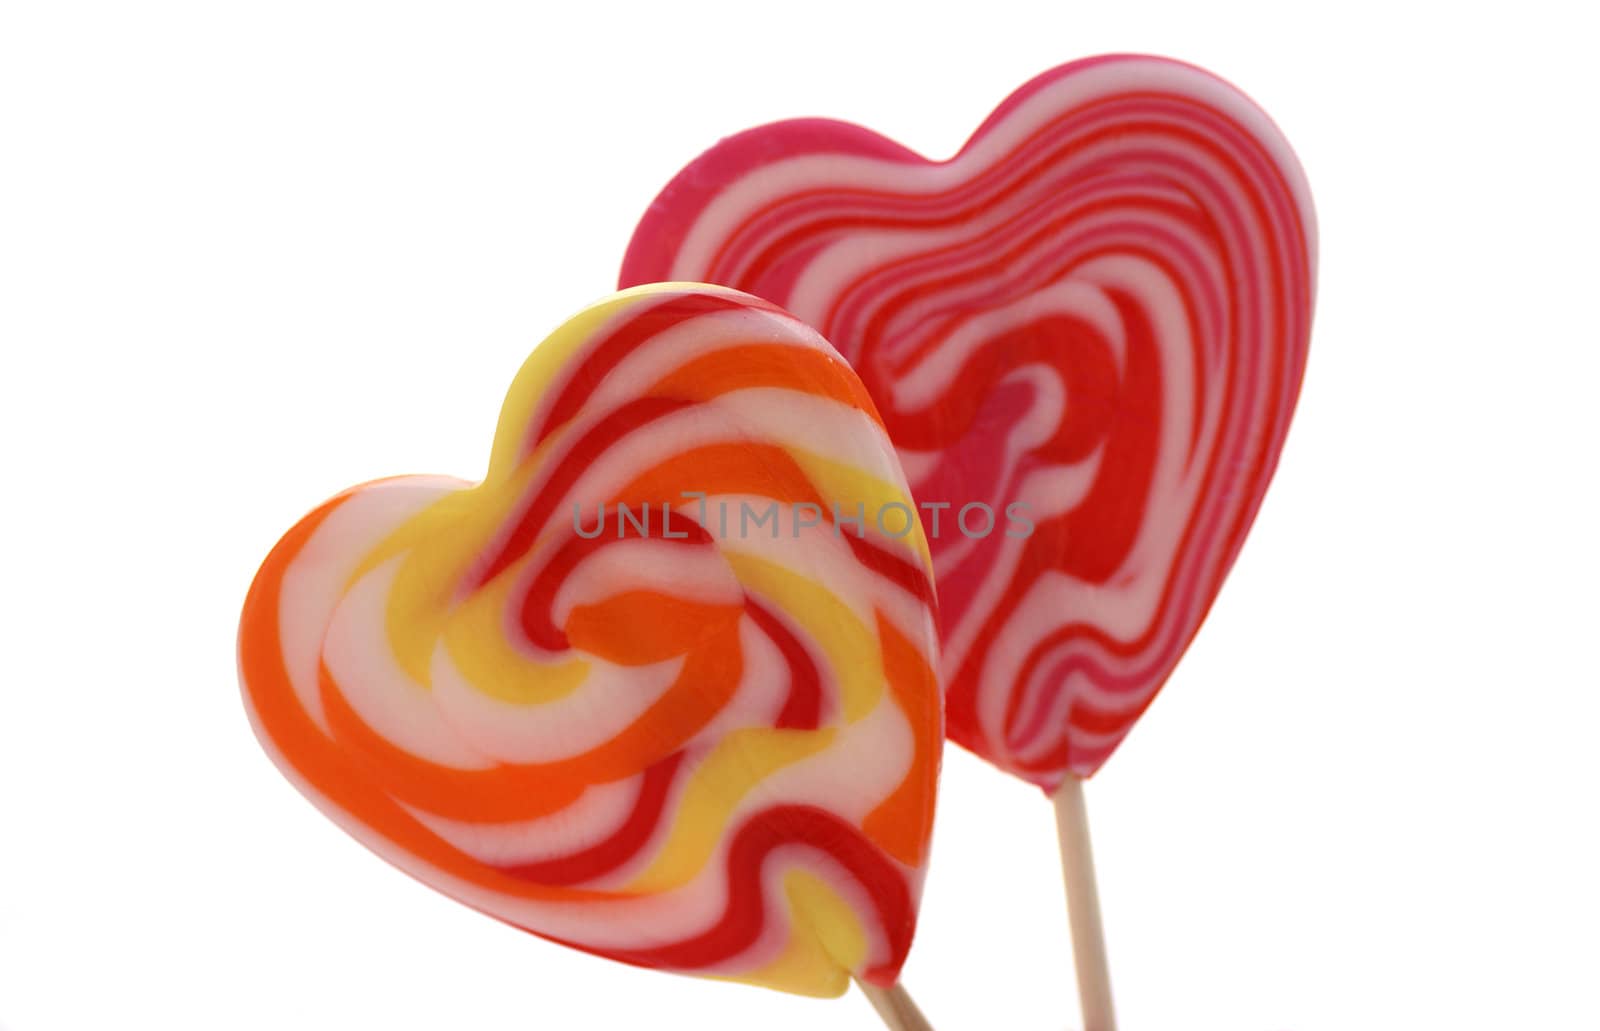 Two isolated heart shaped lollypops.